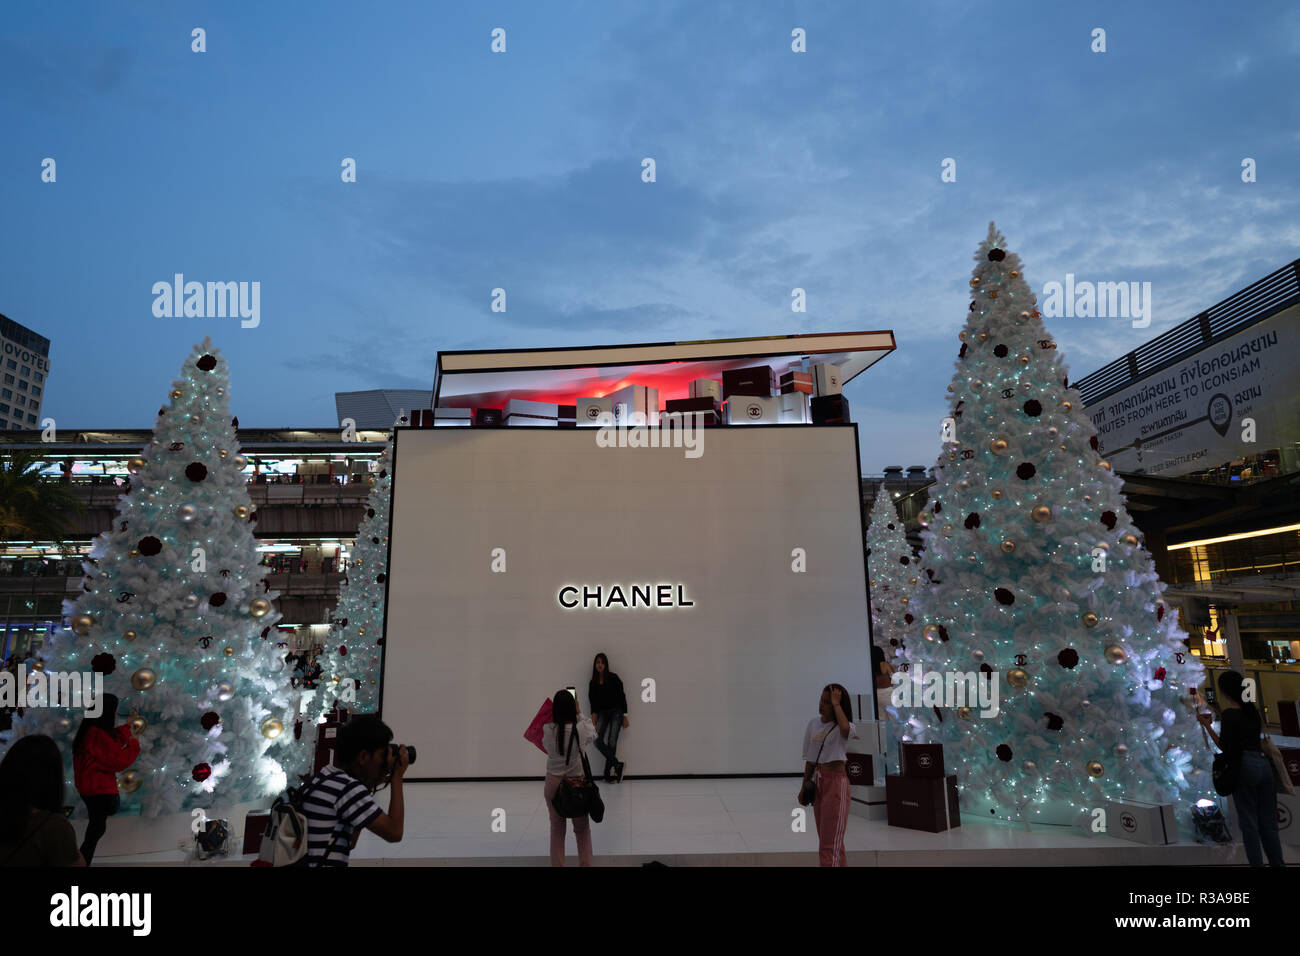 Christmas decorations seen with the Chanel brand seen at Siam